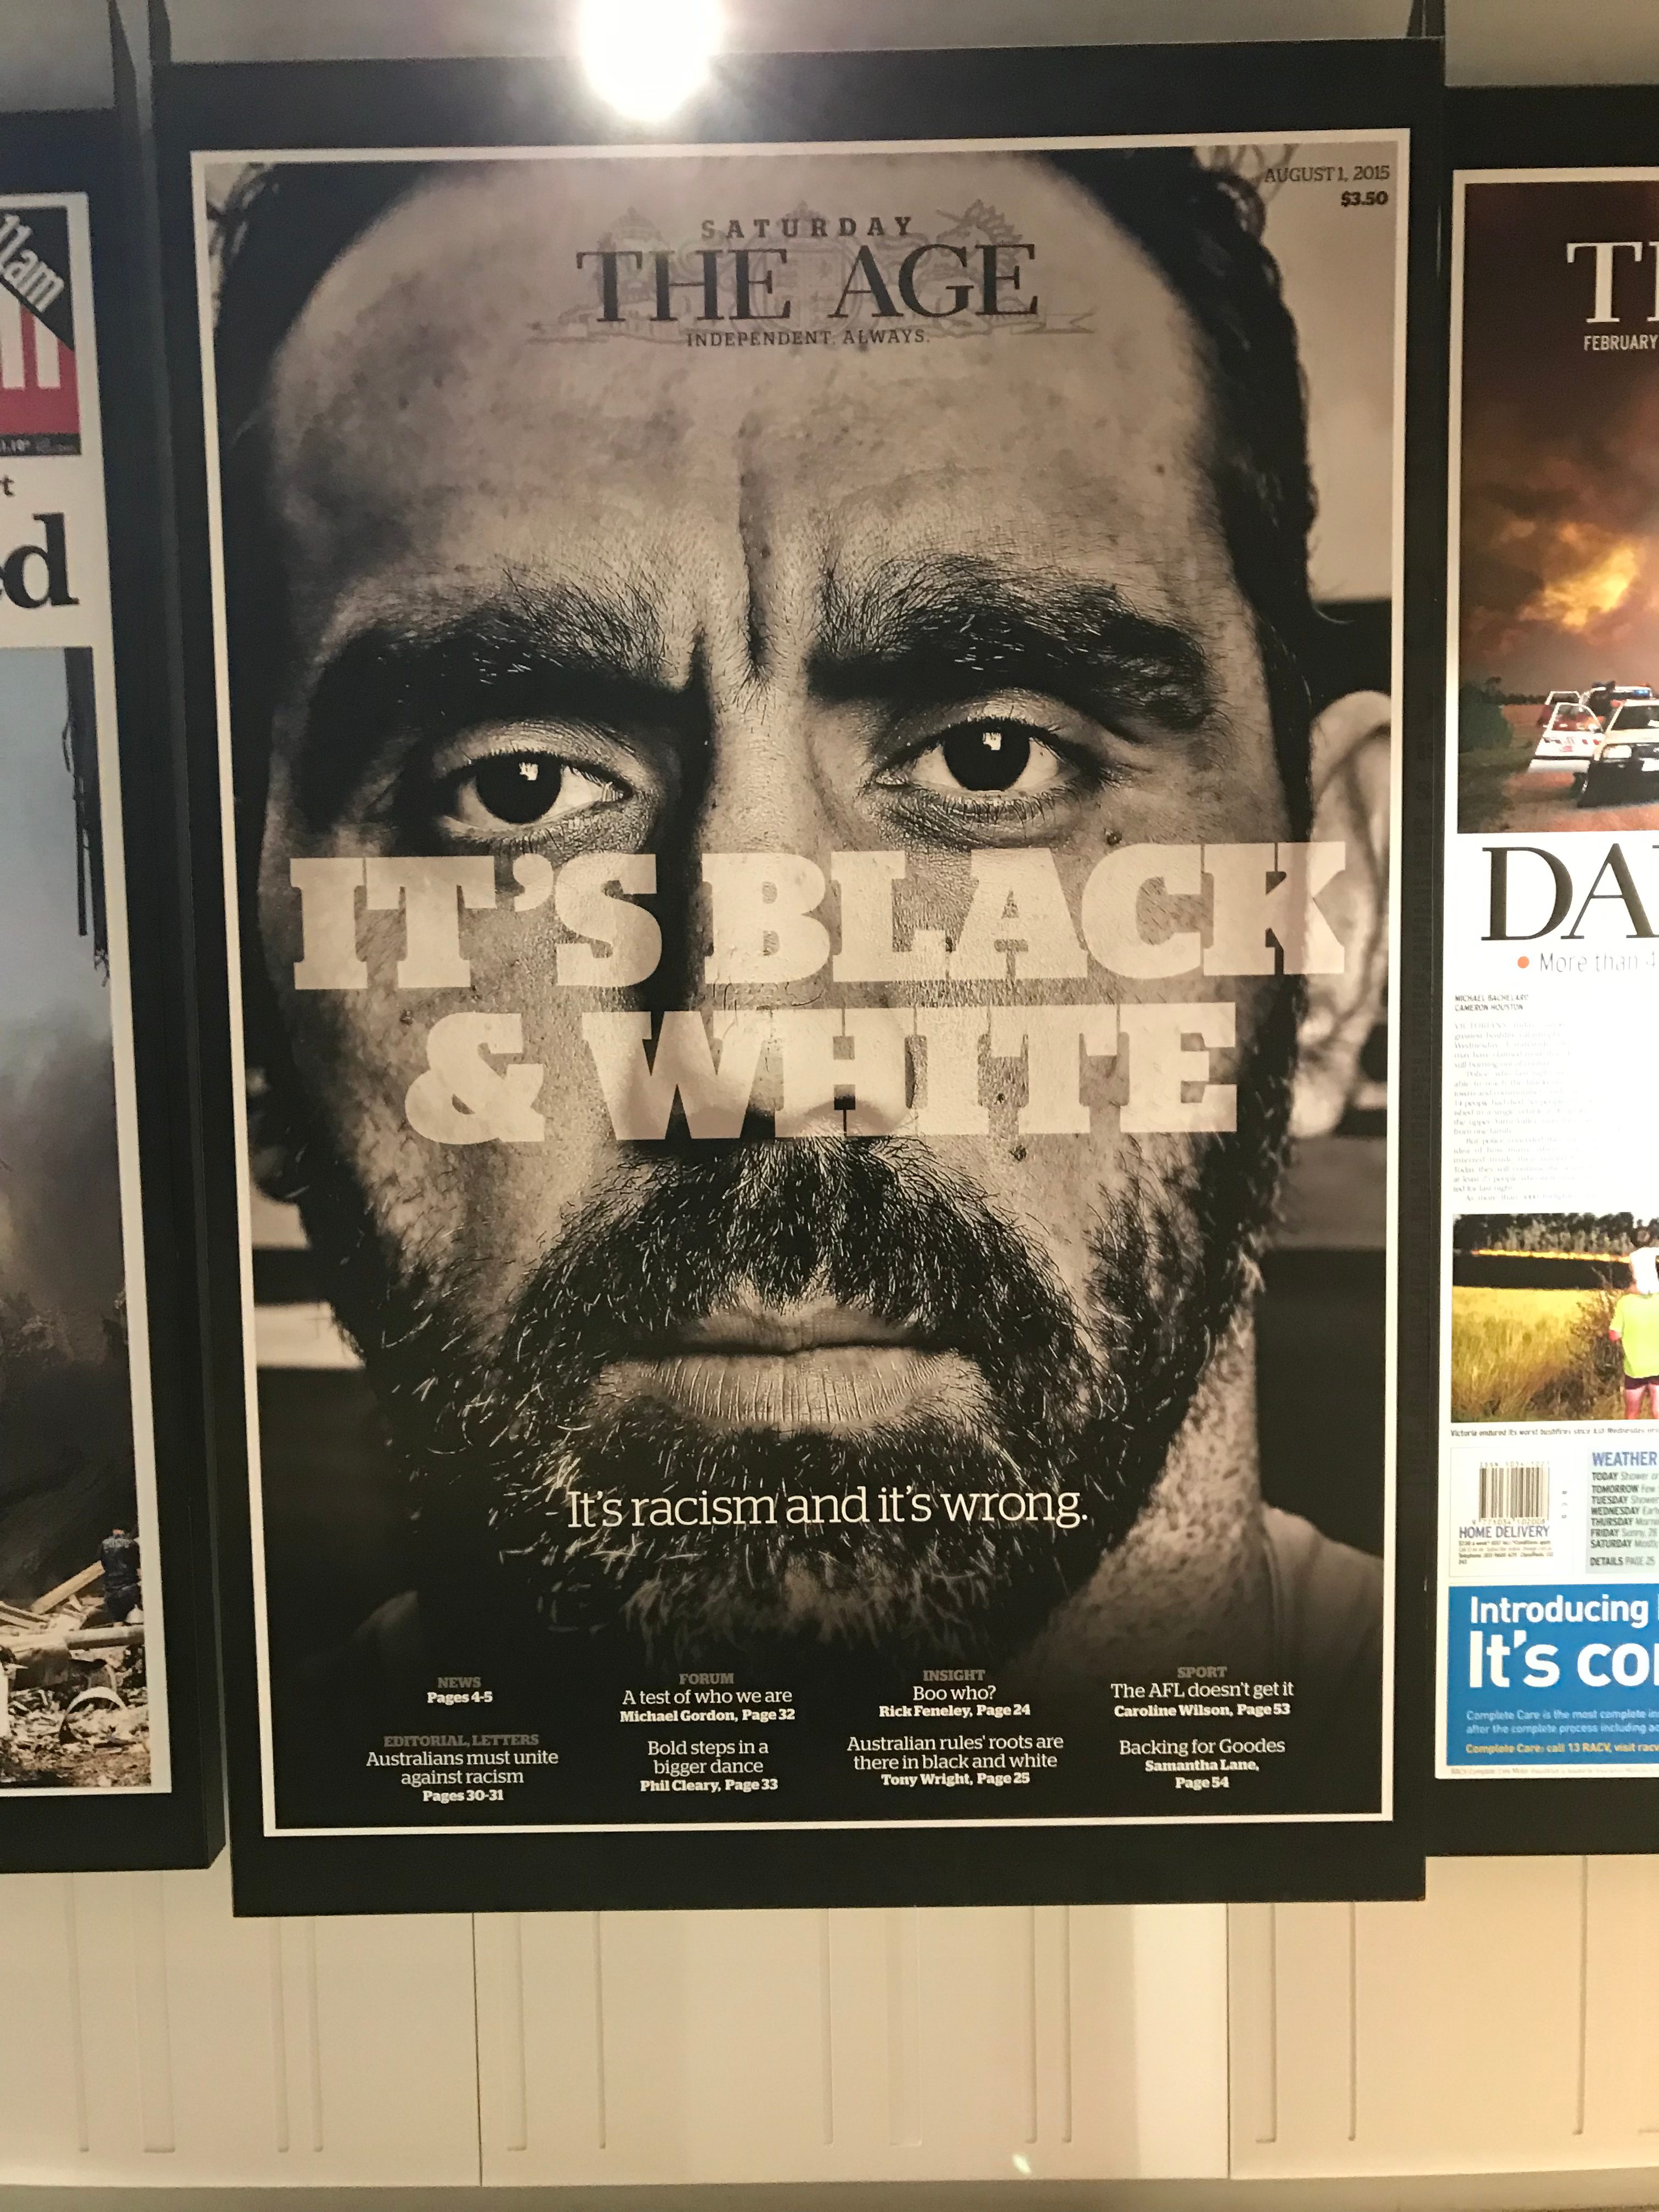 A Saturday Age cover from August 2015 featuring Adam Goodes headlined "It's Racism and it's Wrong".